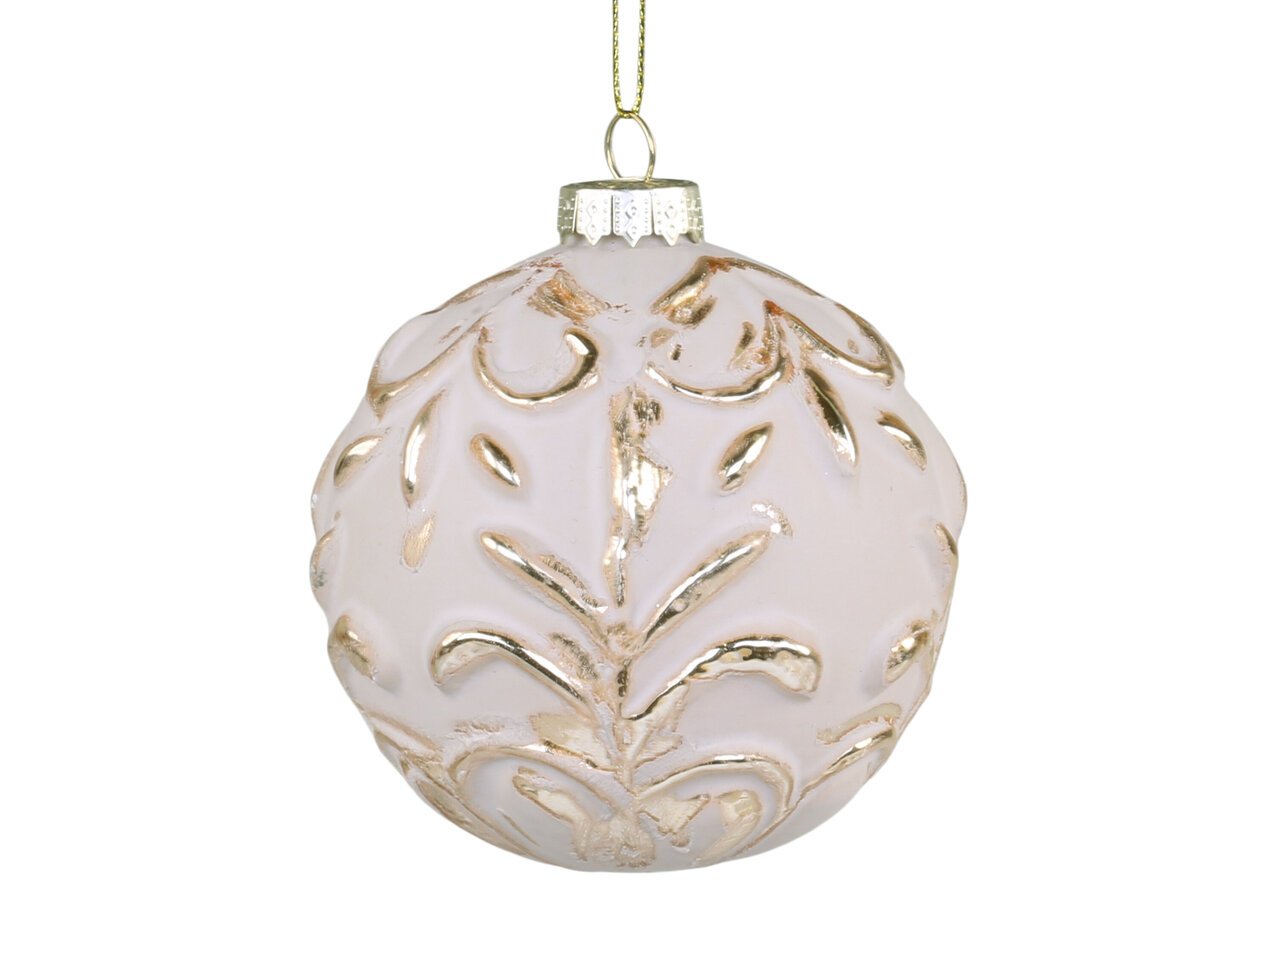 Chic Antique Weihnachtskugel mit Goldmuster Vrilles Preview Image